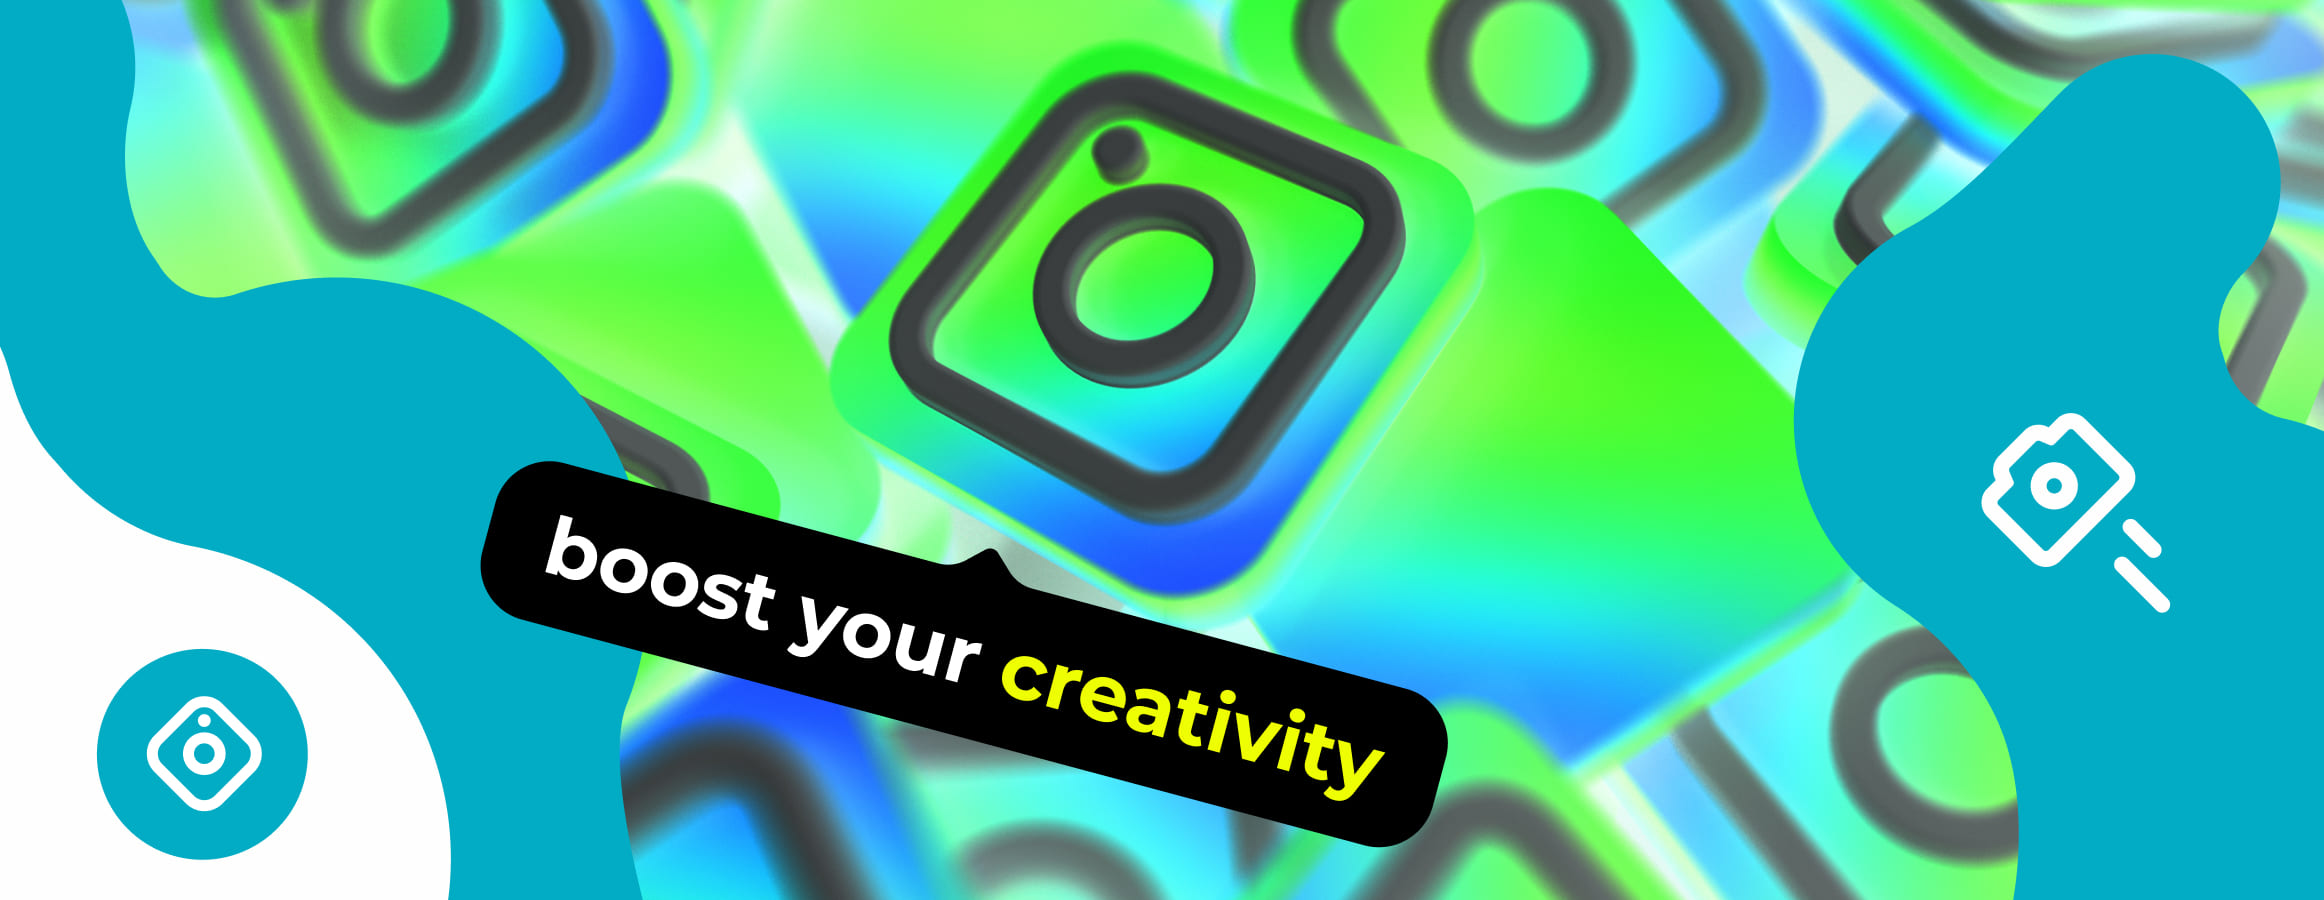 how to get more creativity for posts